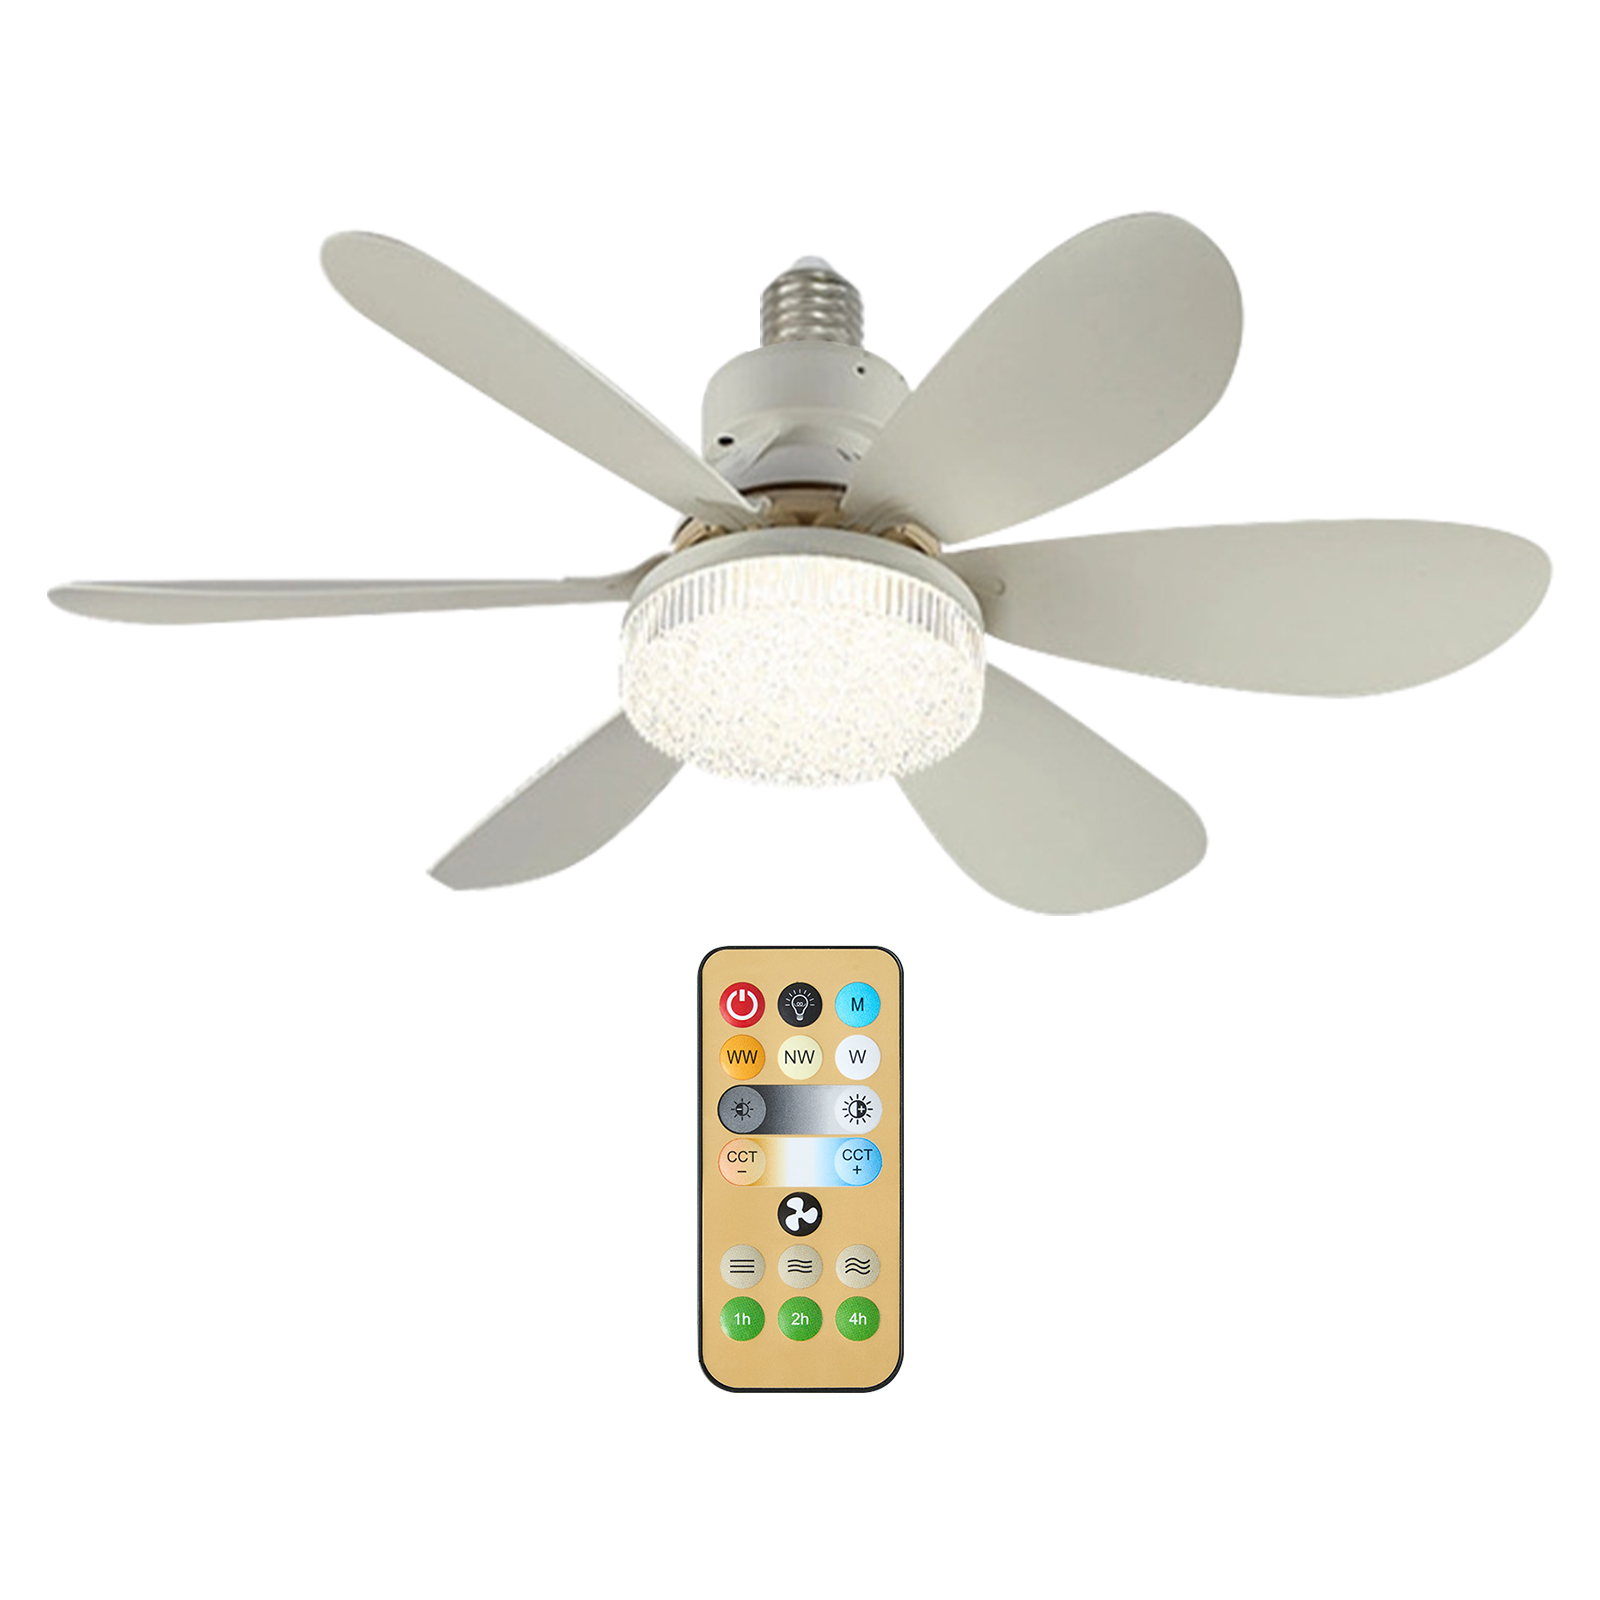 Fan Lamp,Remote Dimmable Kids Dimmable Kids Room Fan Remote Dimmable Led Fan Remote Kids Room Bedroom - image 5 of 6